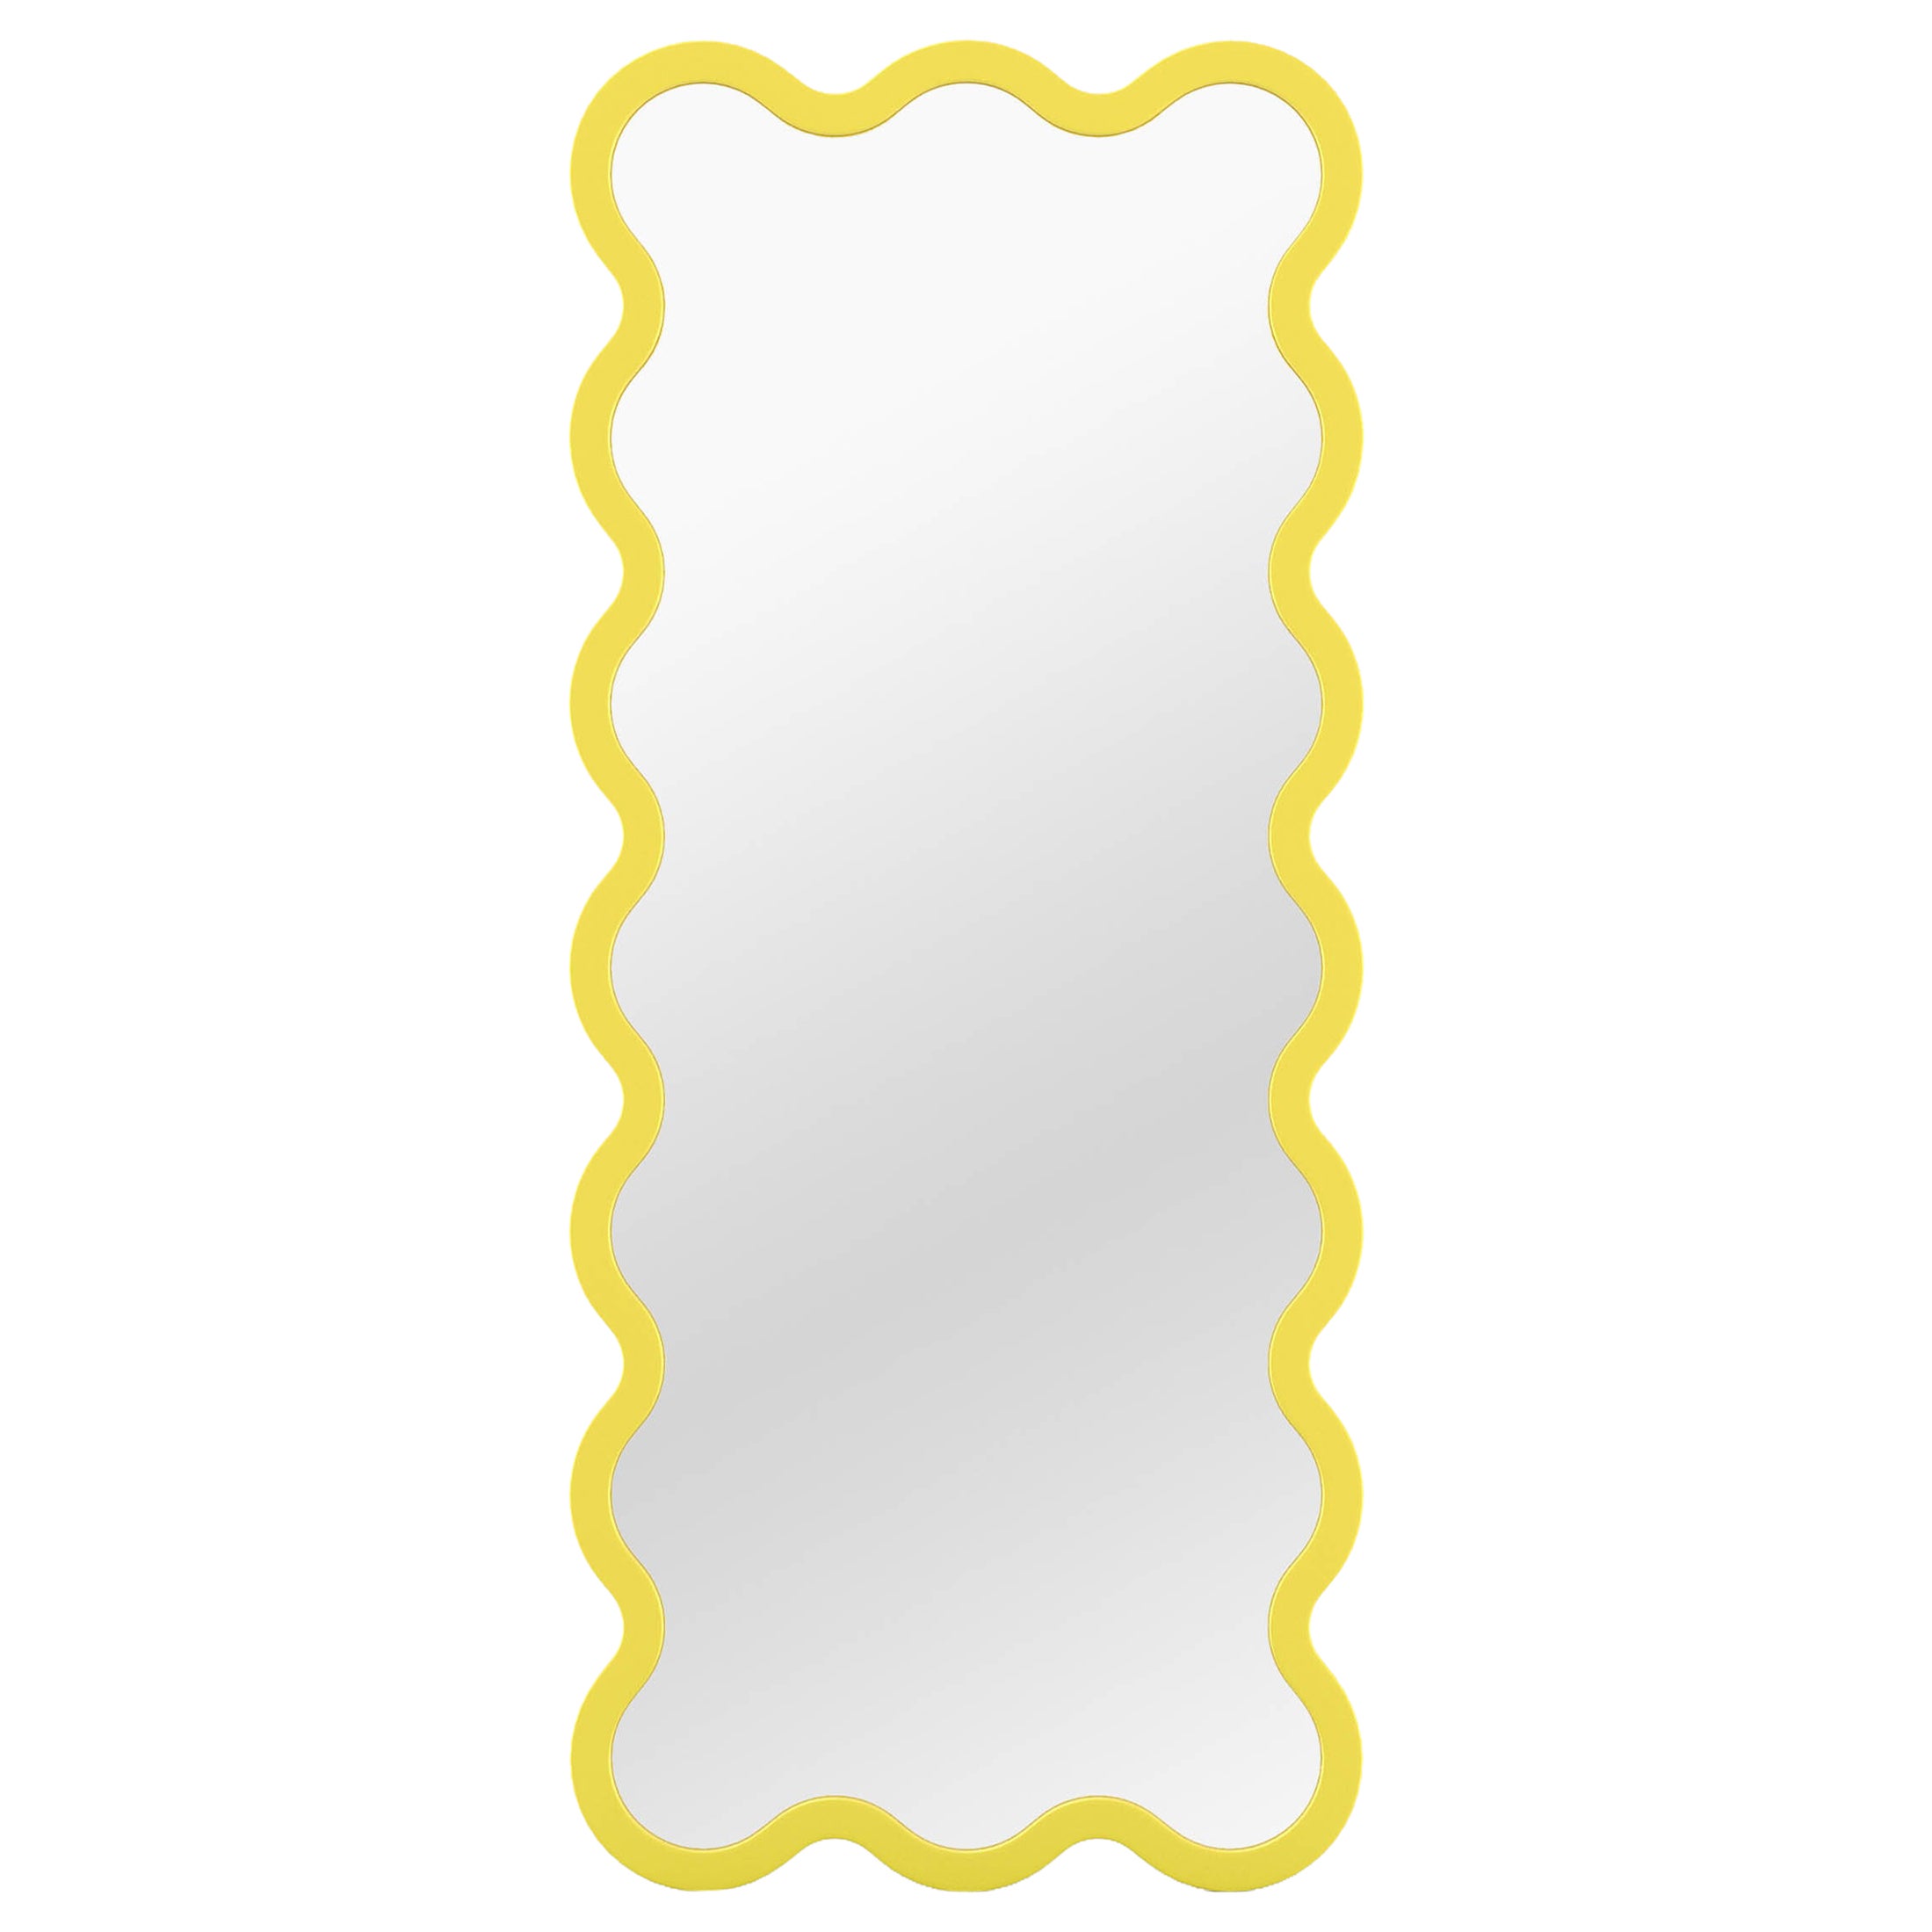 Contemporary Mirror 'Hvyli 16' by Oitoproducts, Yellow Frame